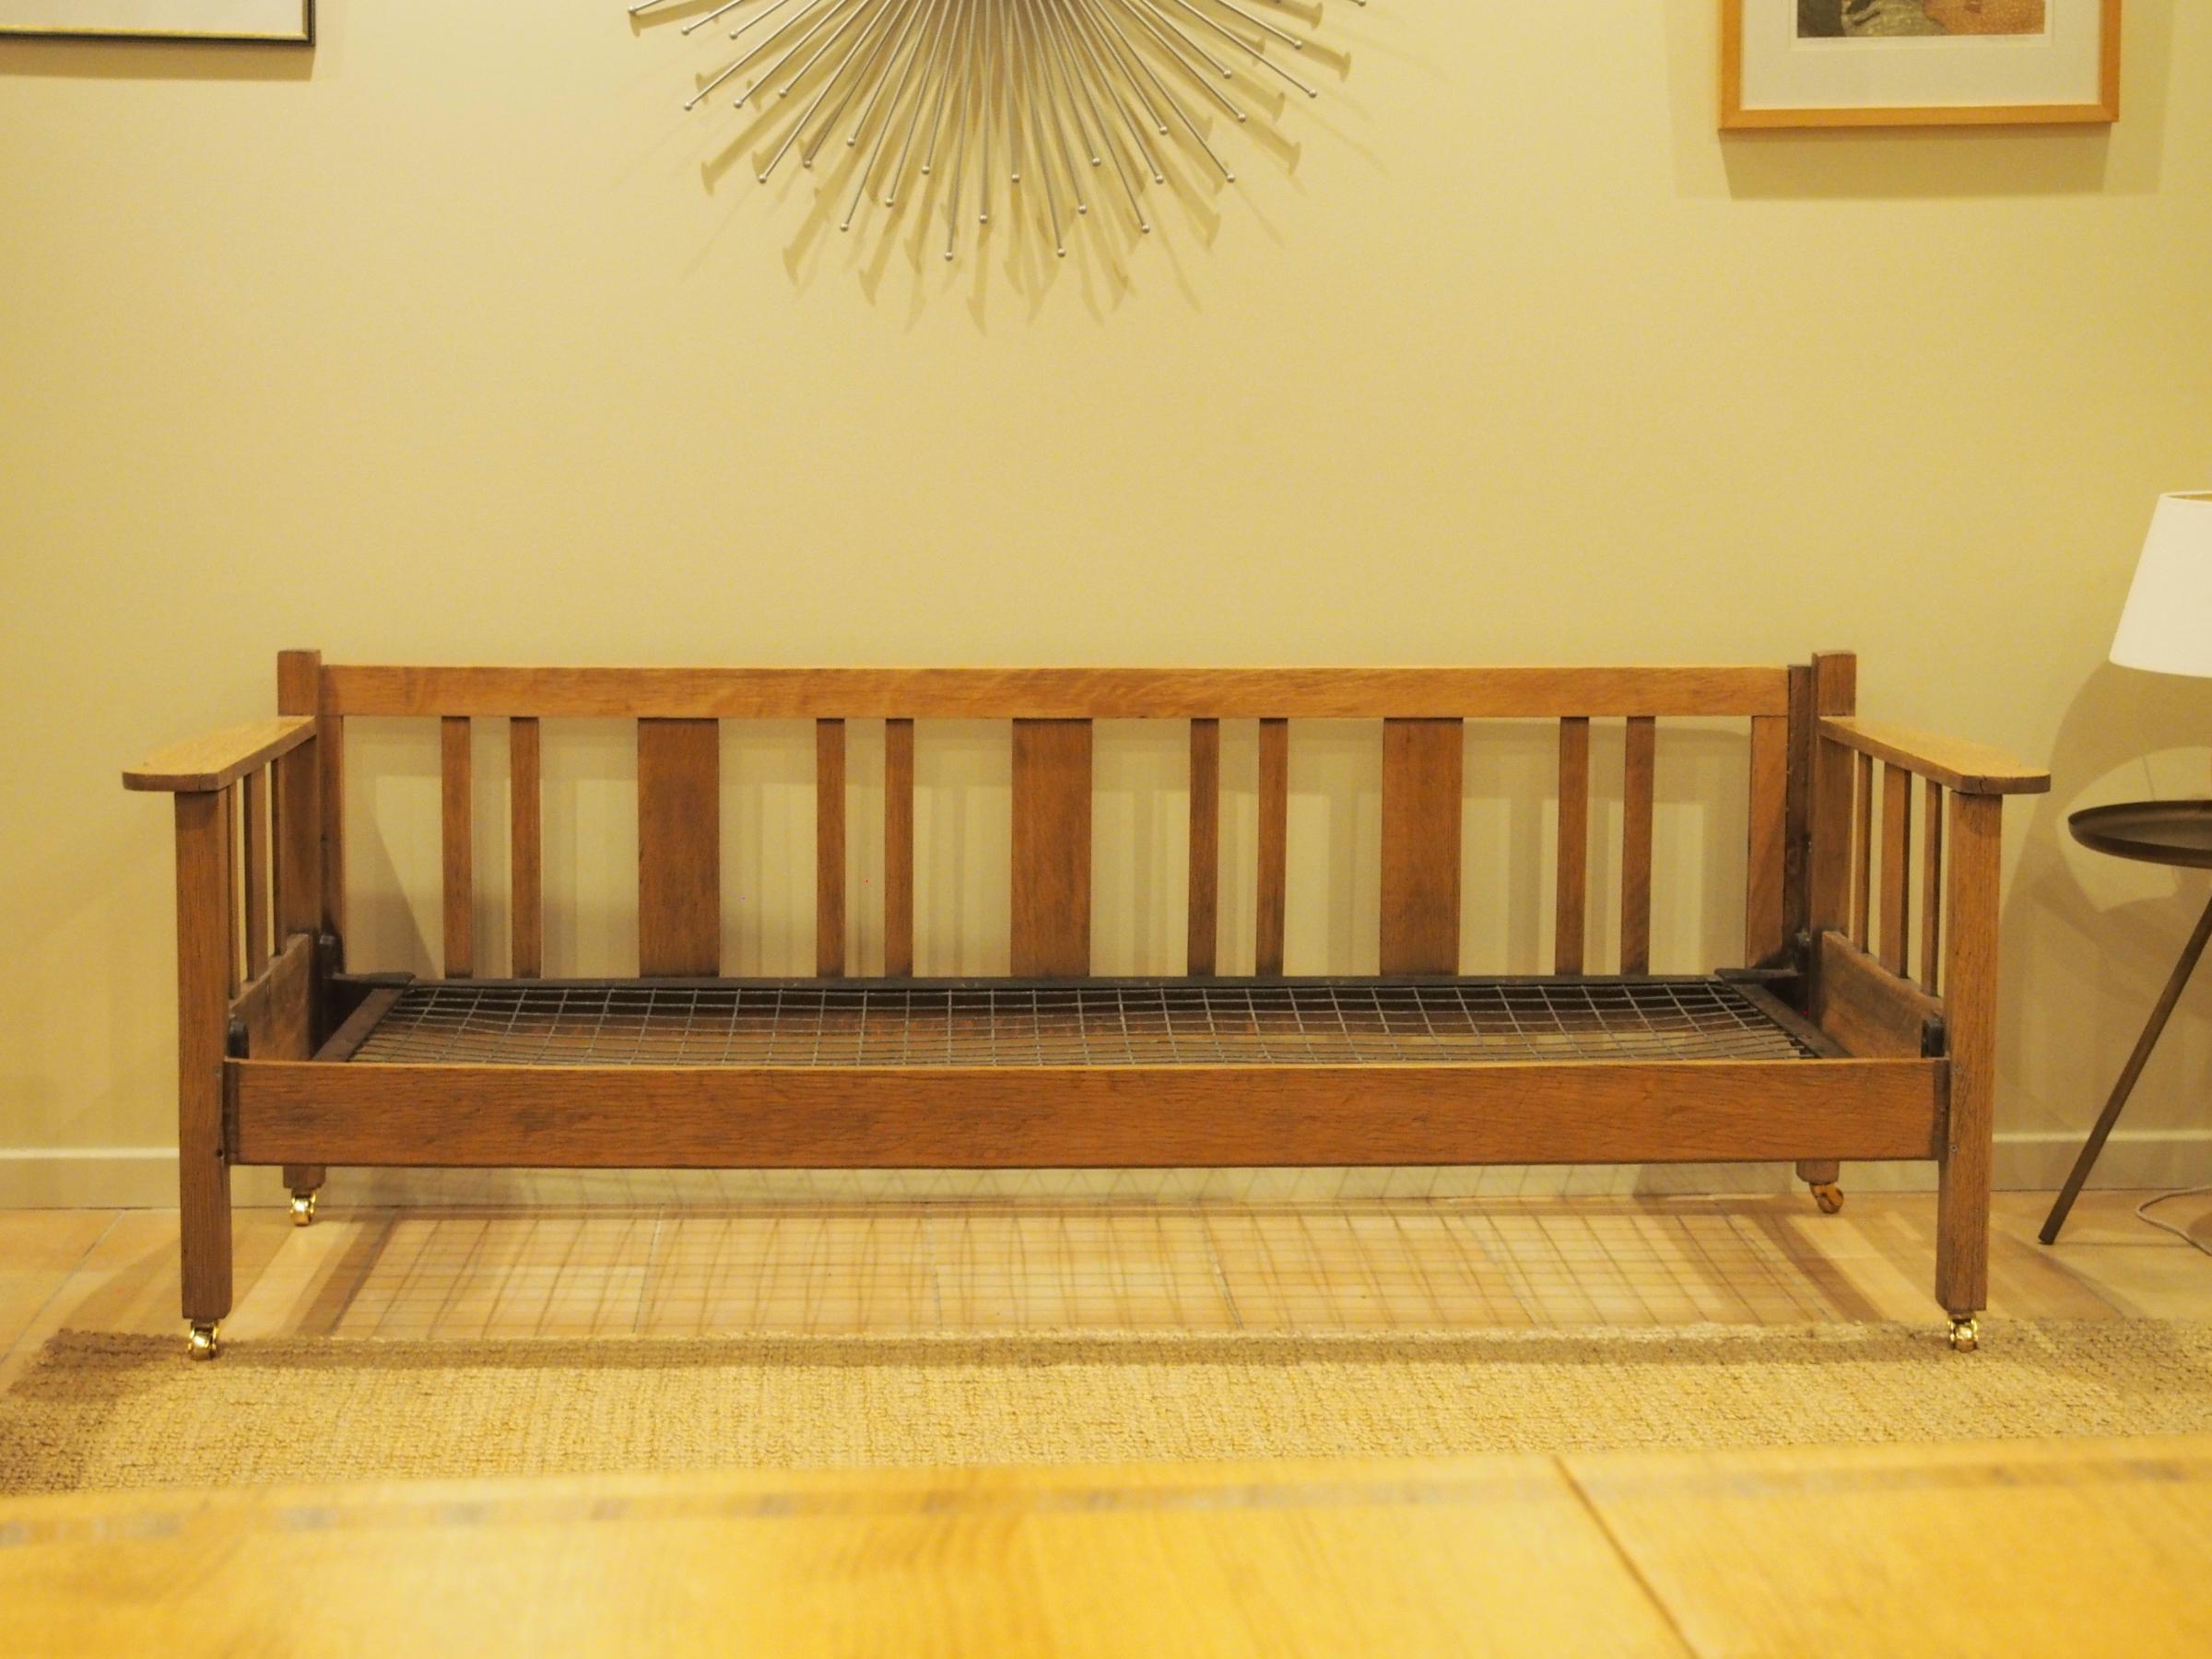 A Heals Day bed fully restored by Sam